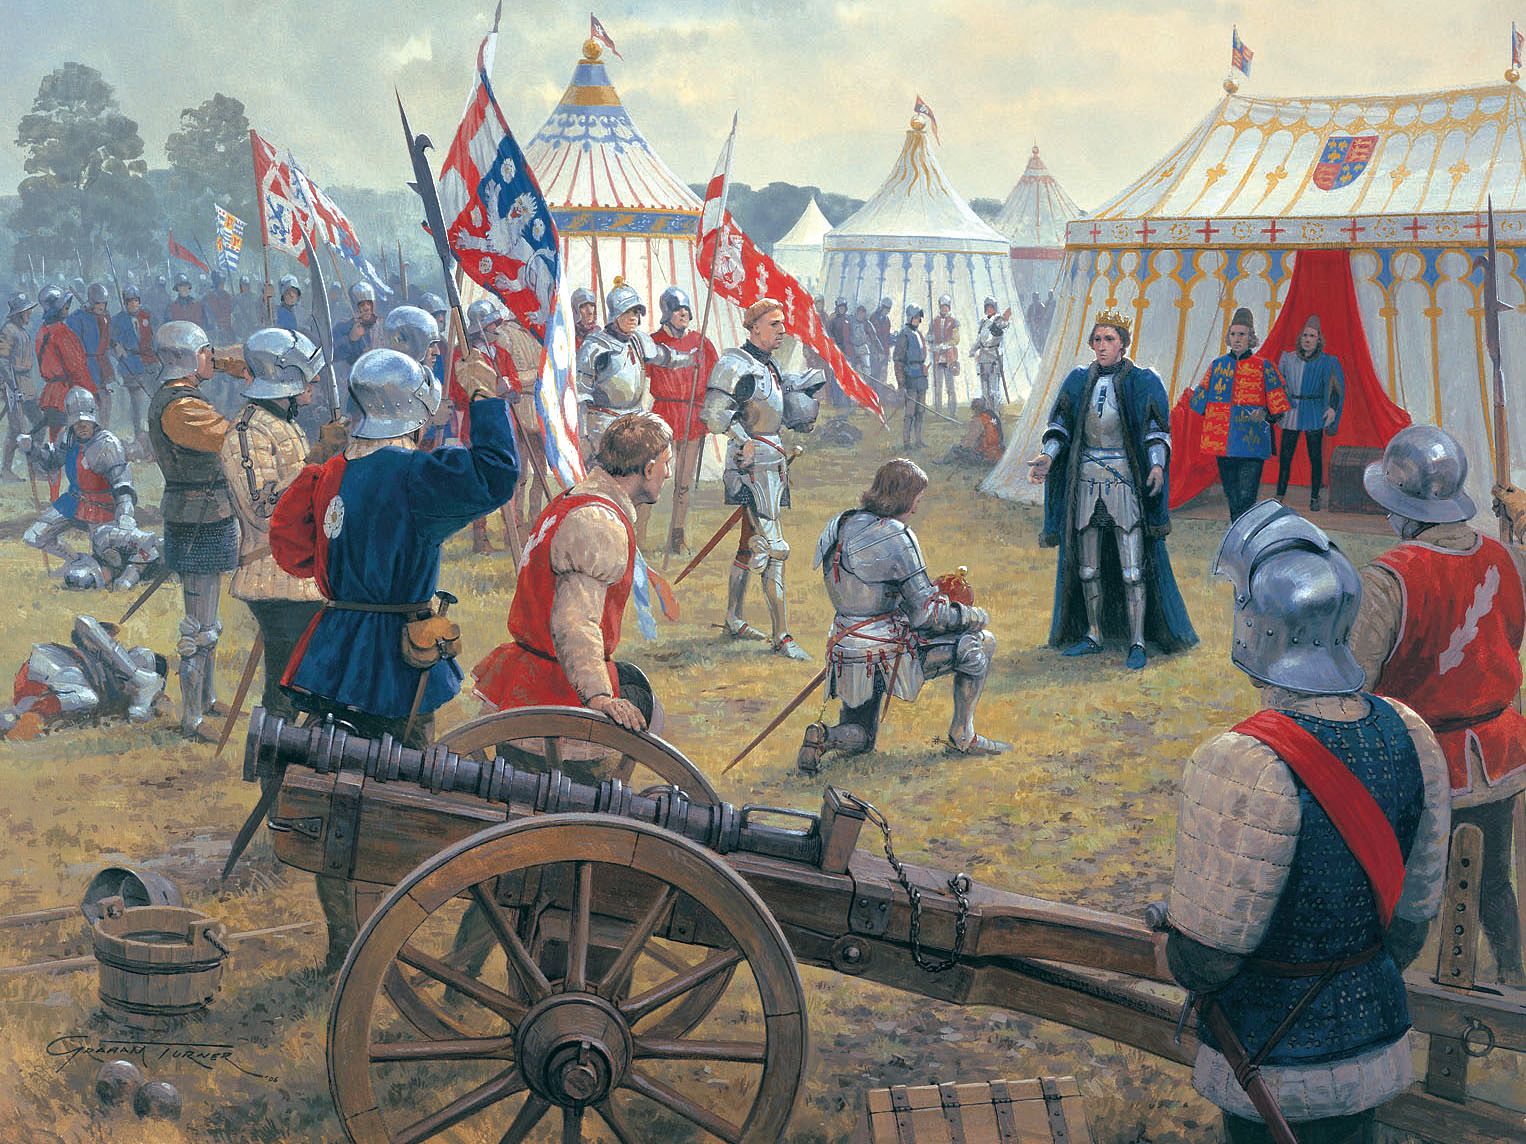 Edward, Earl of March, kneels before King Henry VI following the Yorkist victory at Northampton in 1460. In the foreground is one of the Lancastrian cannons rendered useless by the rain. Henry retained his crown, but the Duke of York would govern in his place. Painting by Graham Turner.